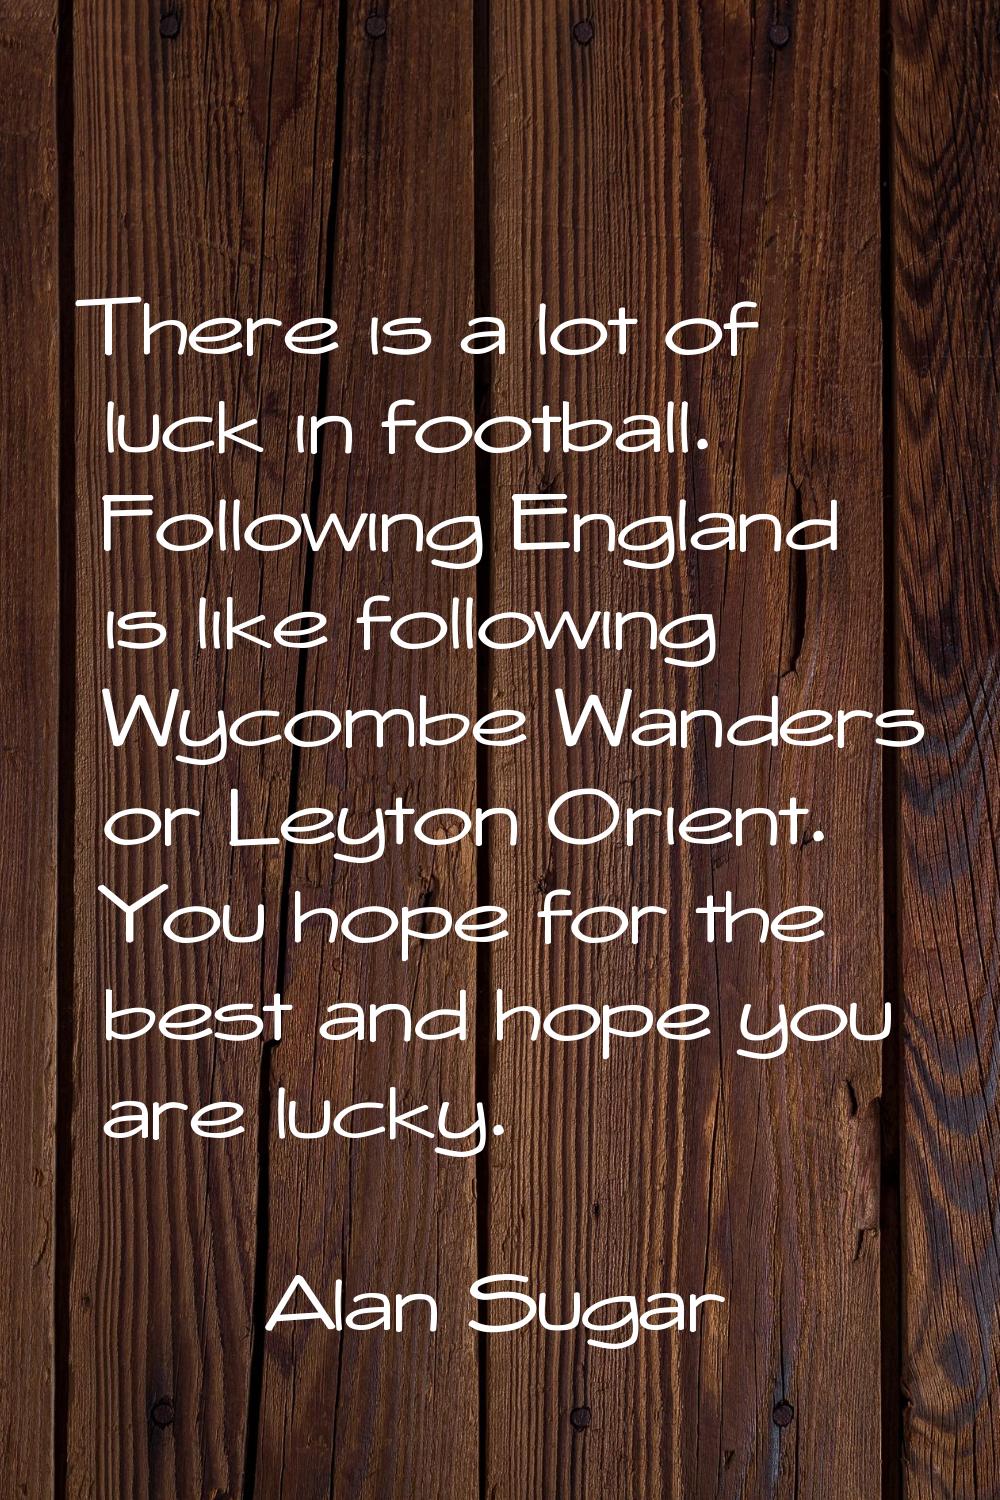 There is a lot of luck in football. Following England is like following Wycombe Wanders or Leyton O